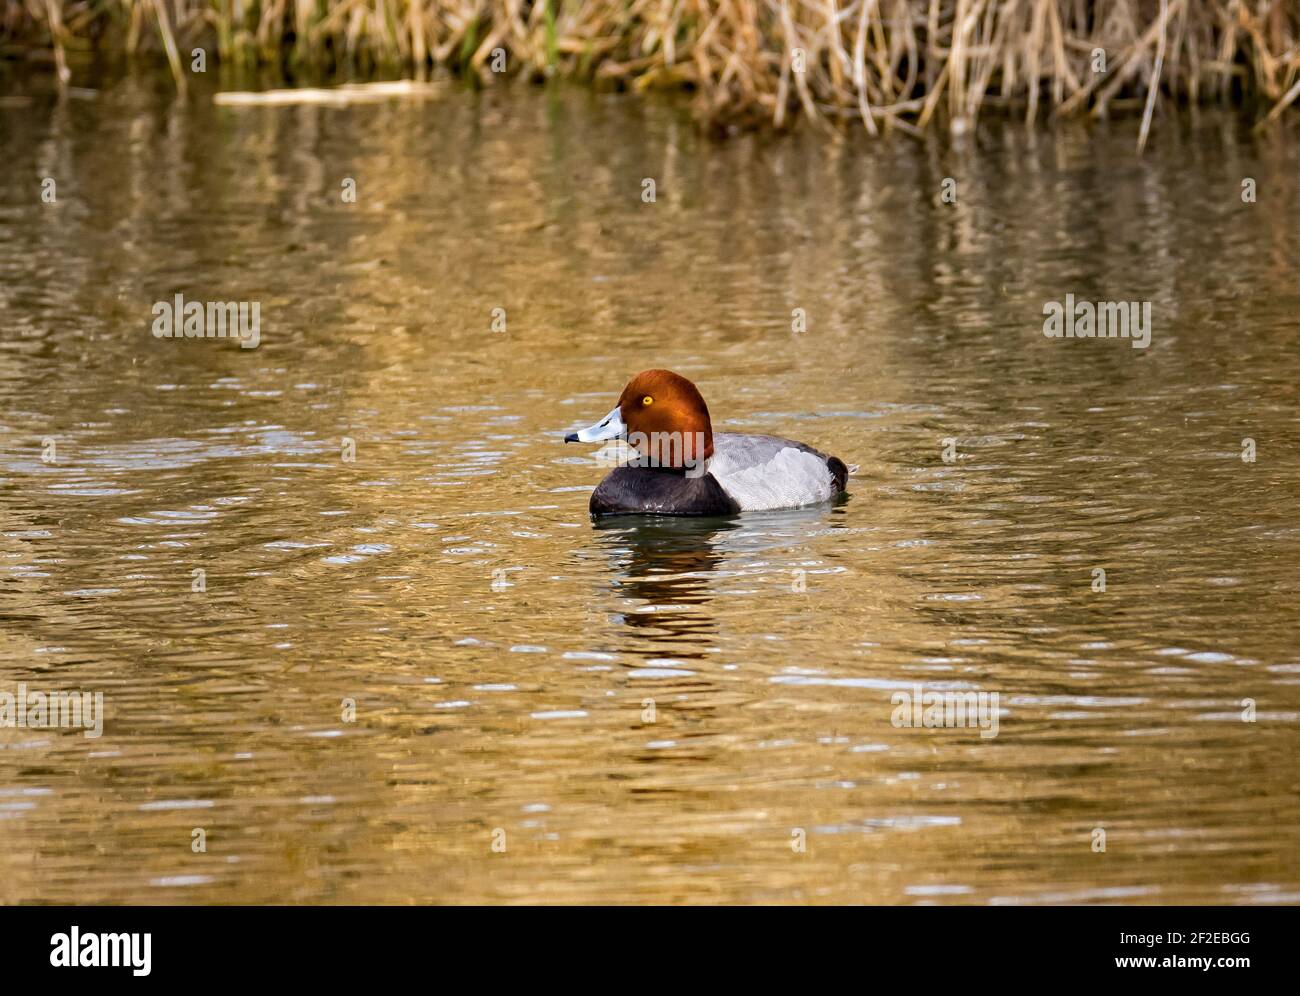 This is a view of a type of duck known as a 'Redhead' (Aythya americana).  It obviously got its name from its iridescent cinnamon-red head. Stock Photo